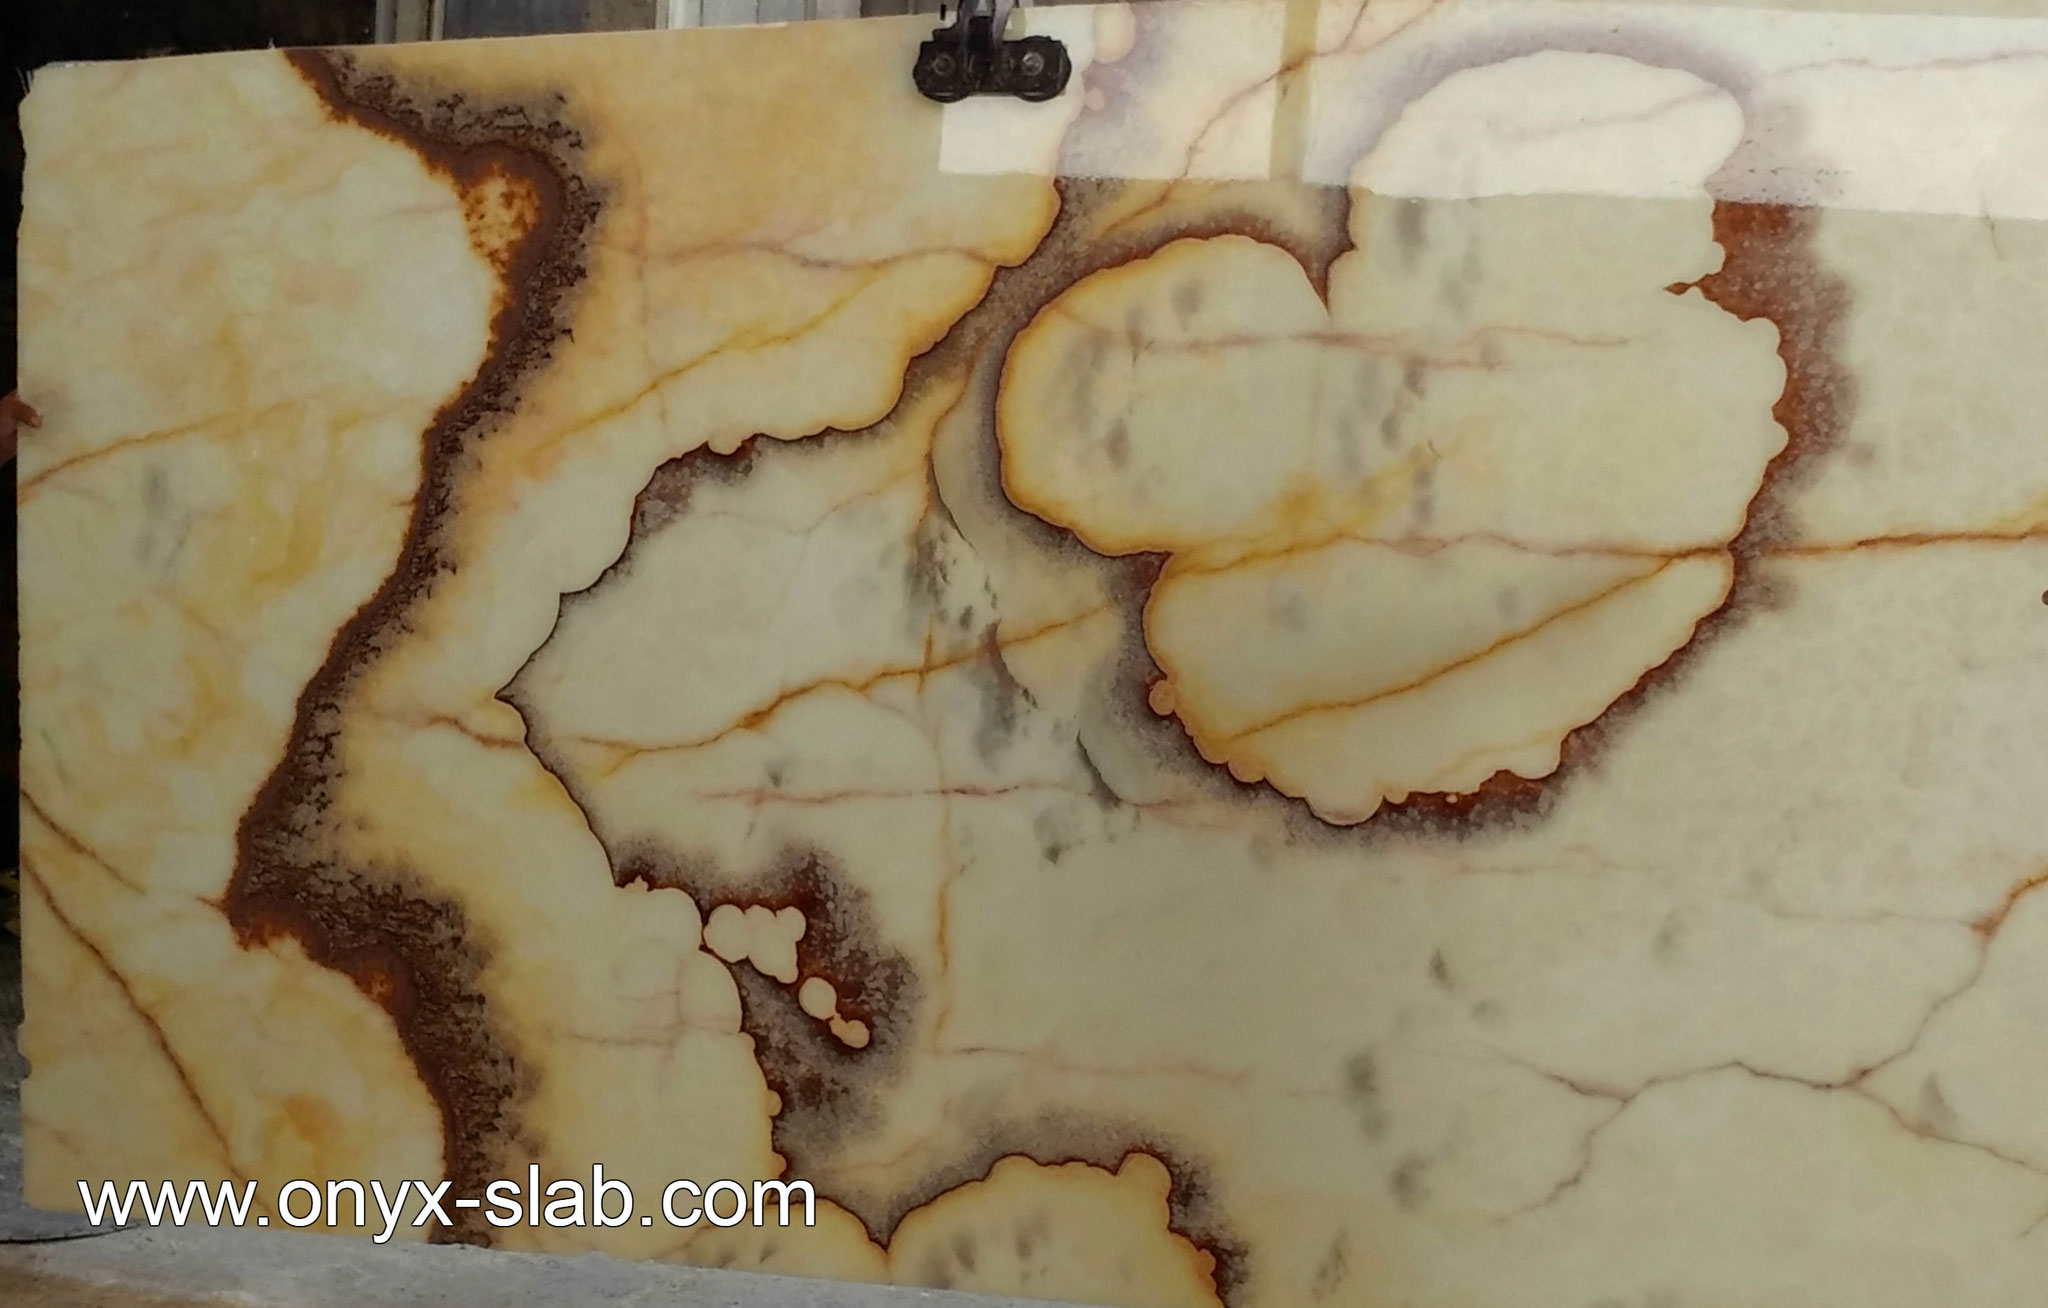 Onyx Slabs, red onyx slabs, Onyx Slabs Price, onyx stone slabs for sale, onyx slab cost, onyx countertops Price, bookmatched onyx slabs